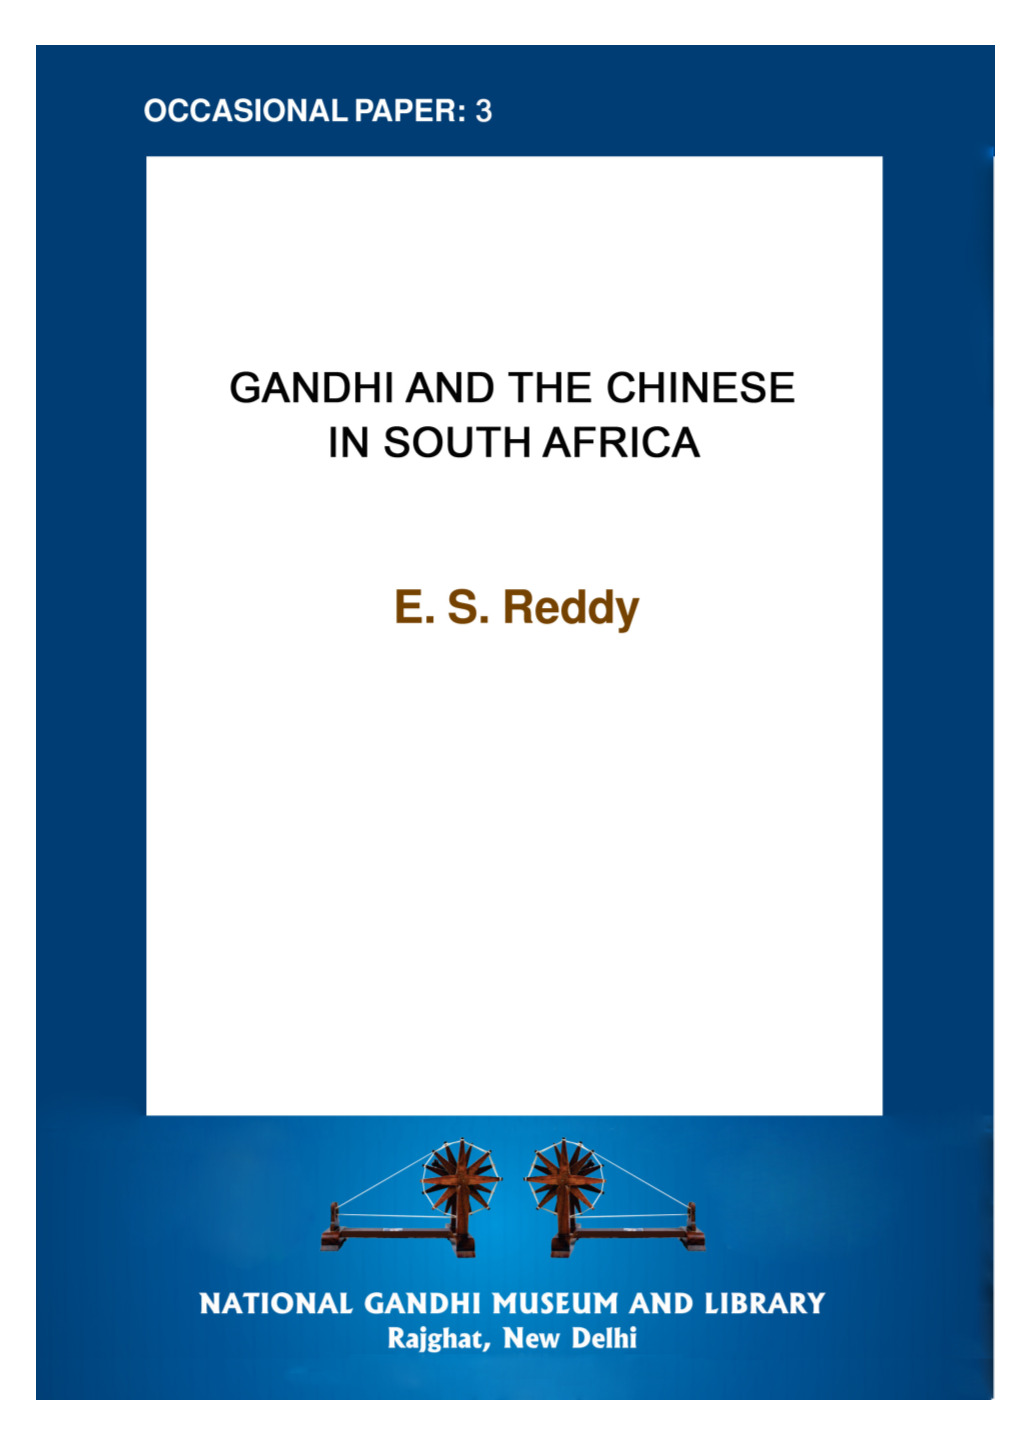 GANDHI and the CHINESE in SOUTH AFRICA.Pmd